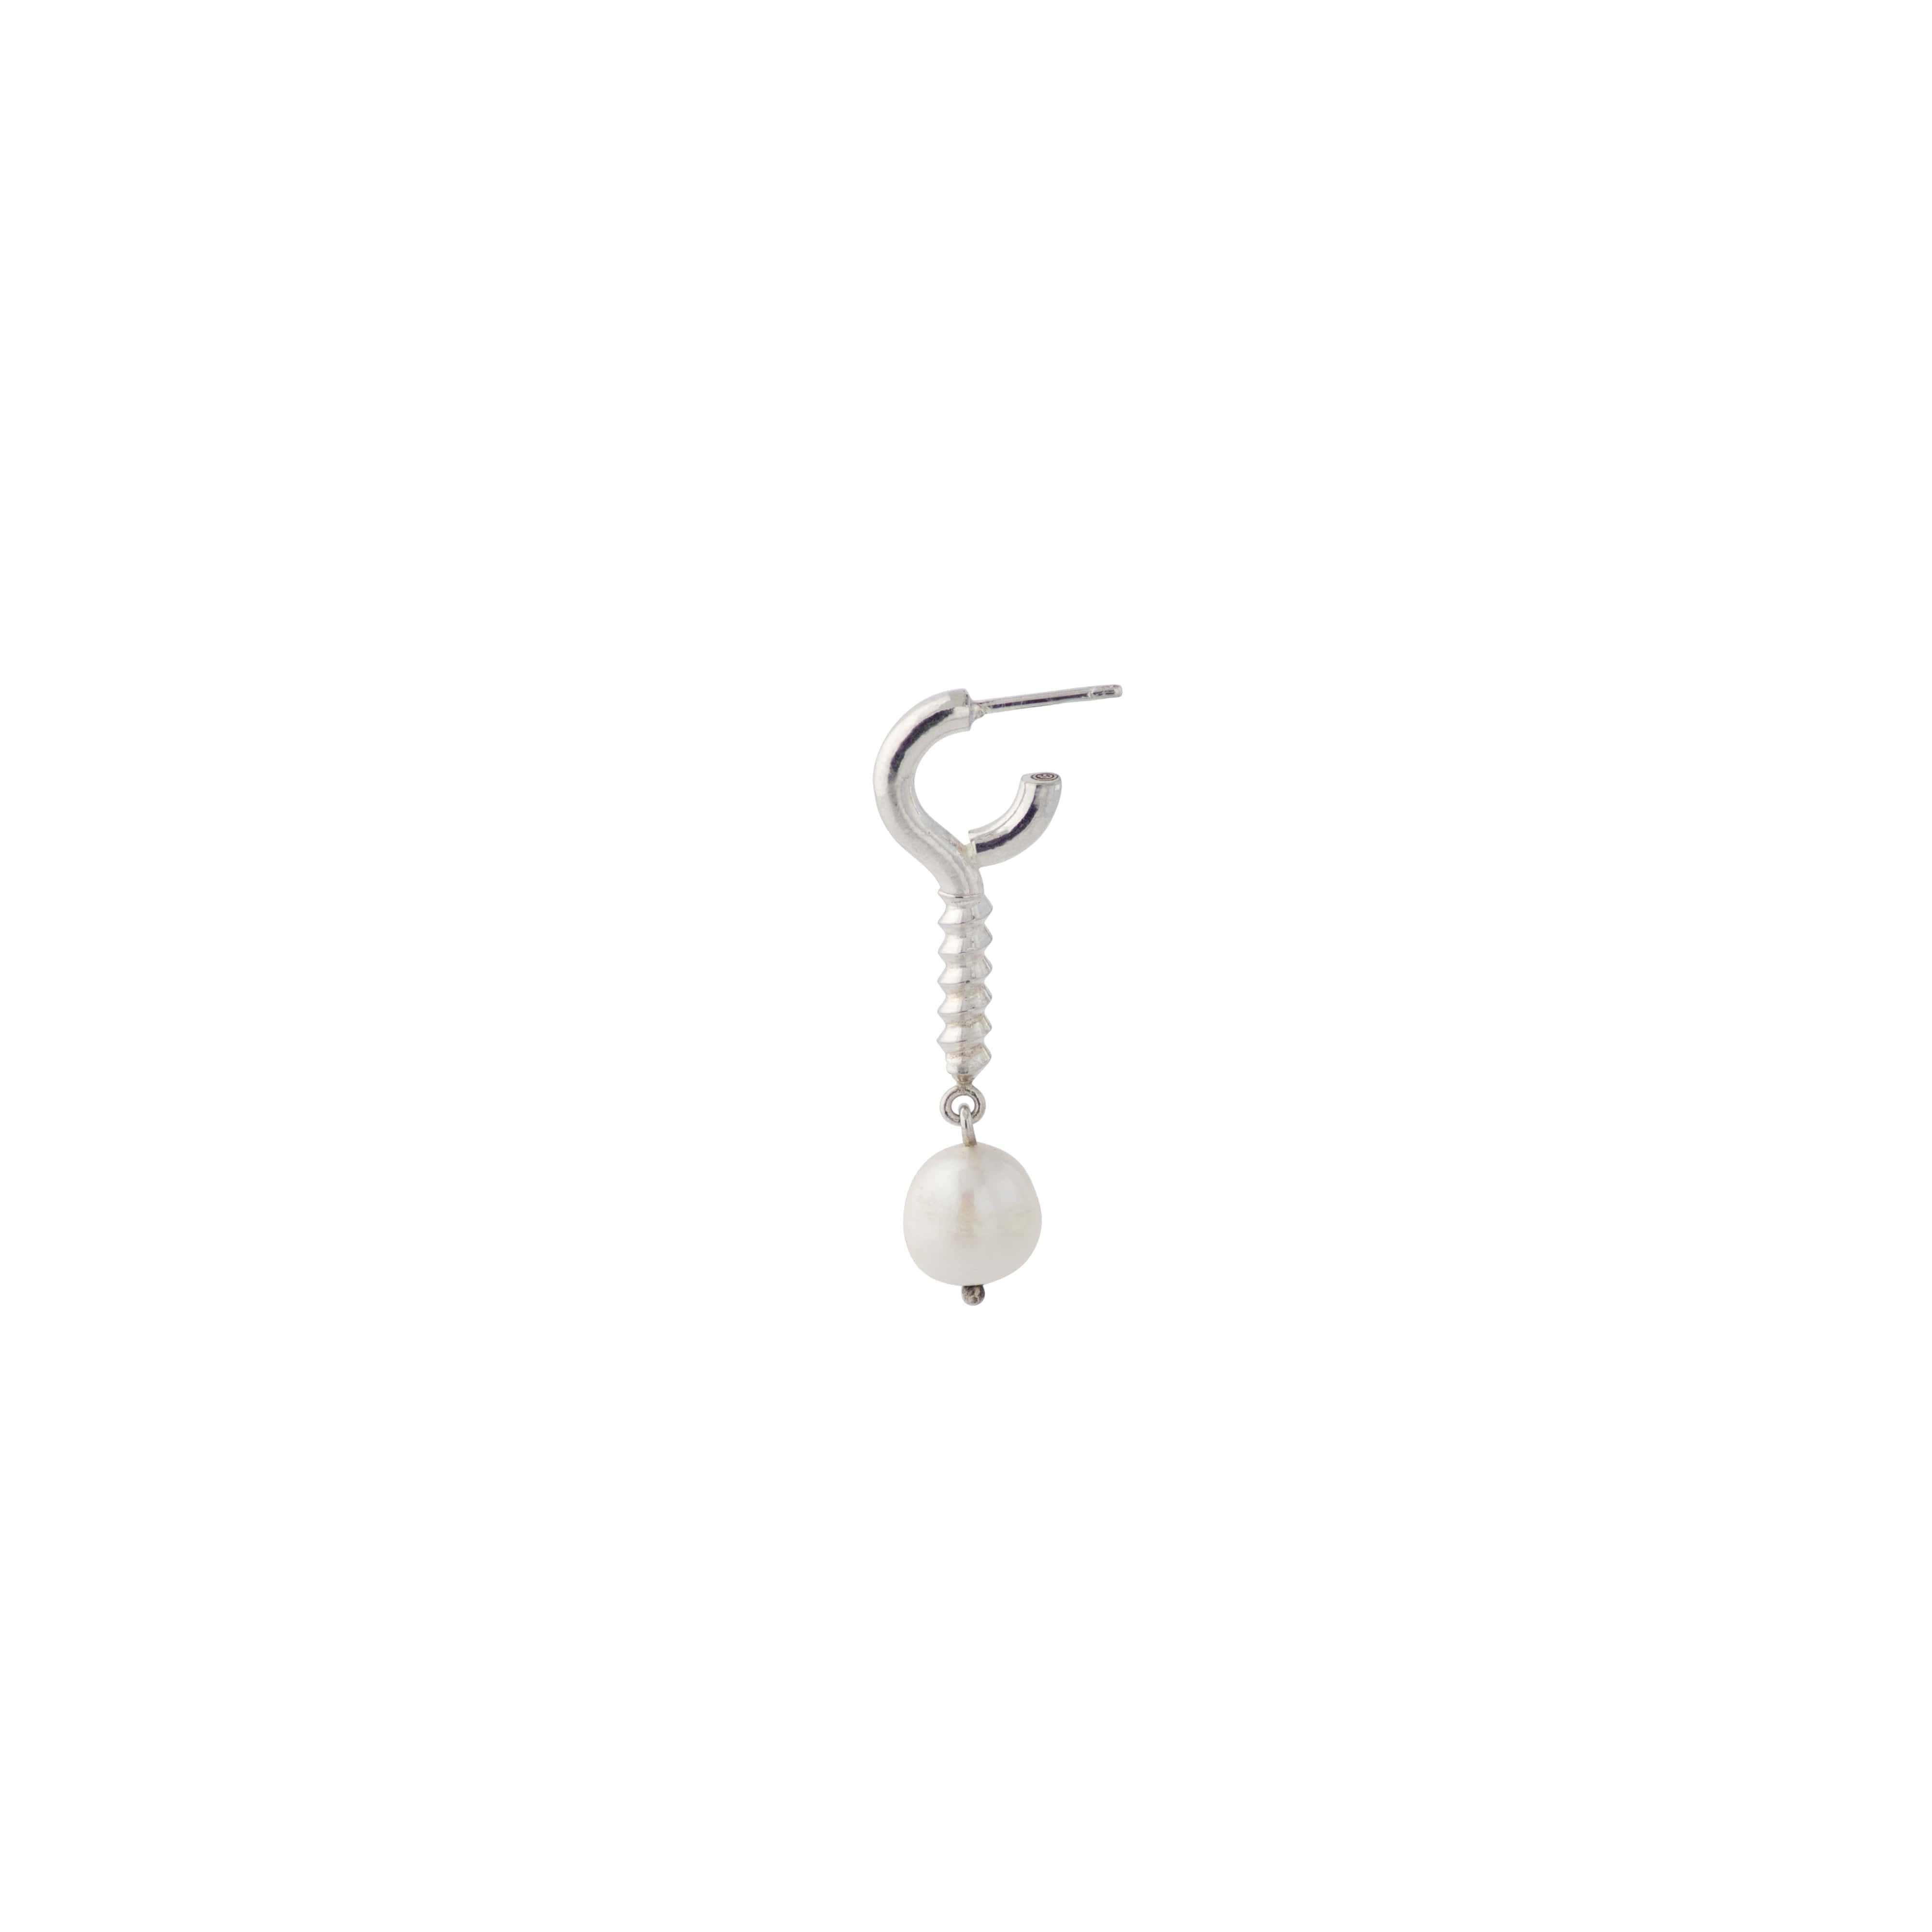 Sterling silver eye hook shaped earring with a hanging baroque freshwater pearl.

Sold as single.
For pierced ears.
One size only.
Type of closure: Traditional closure
Material: 925 Sterling Silver
Finishing: Silver plated.
Measurements:
- Length: